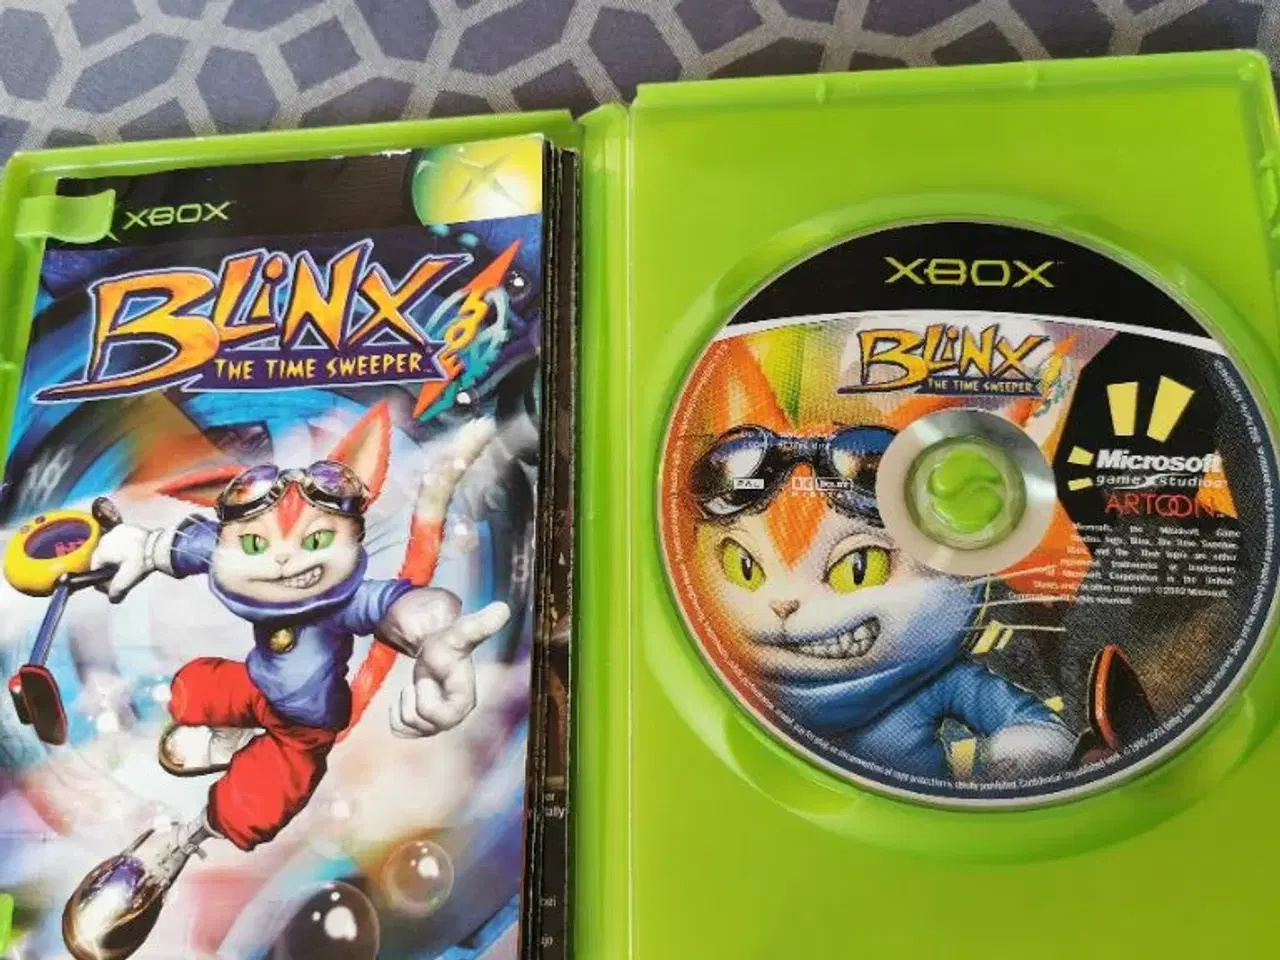 Billede 2 - Blinx the time sweeper!!!